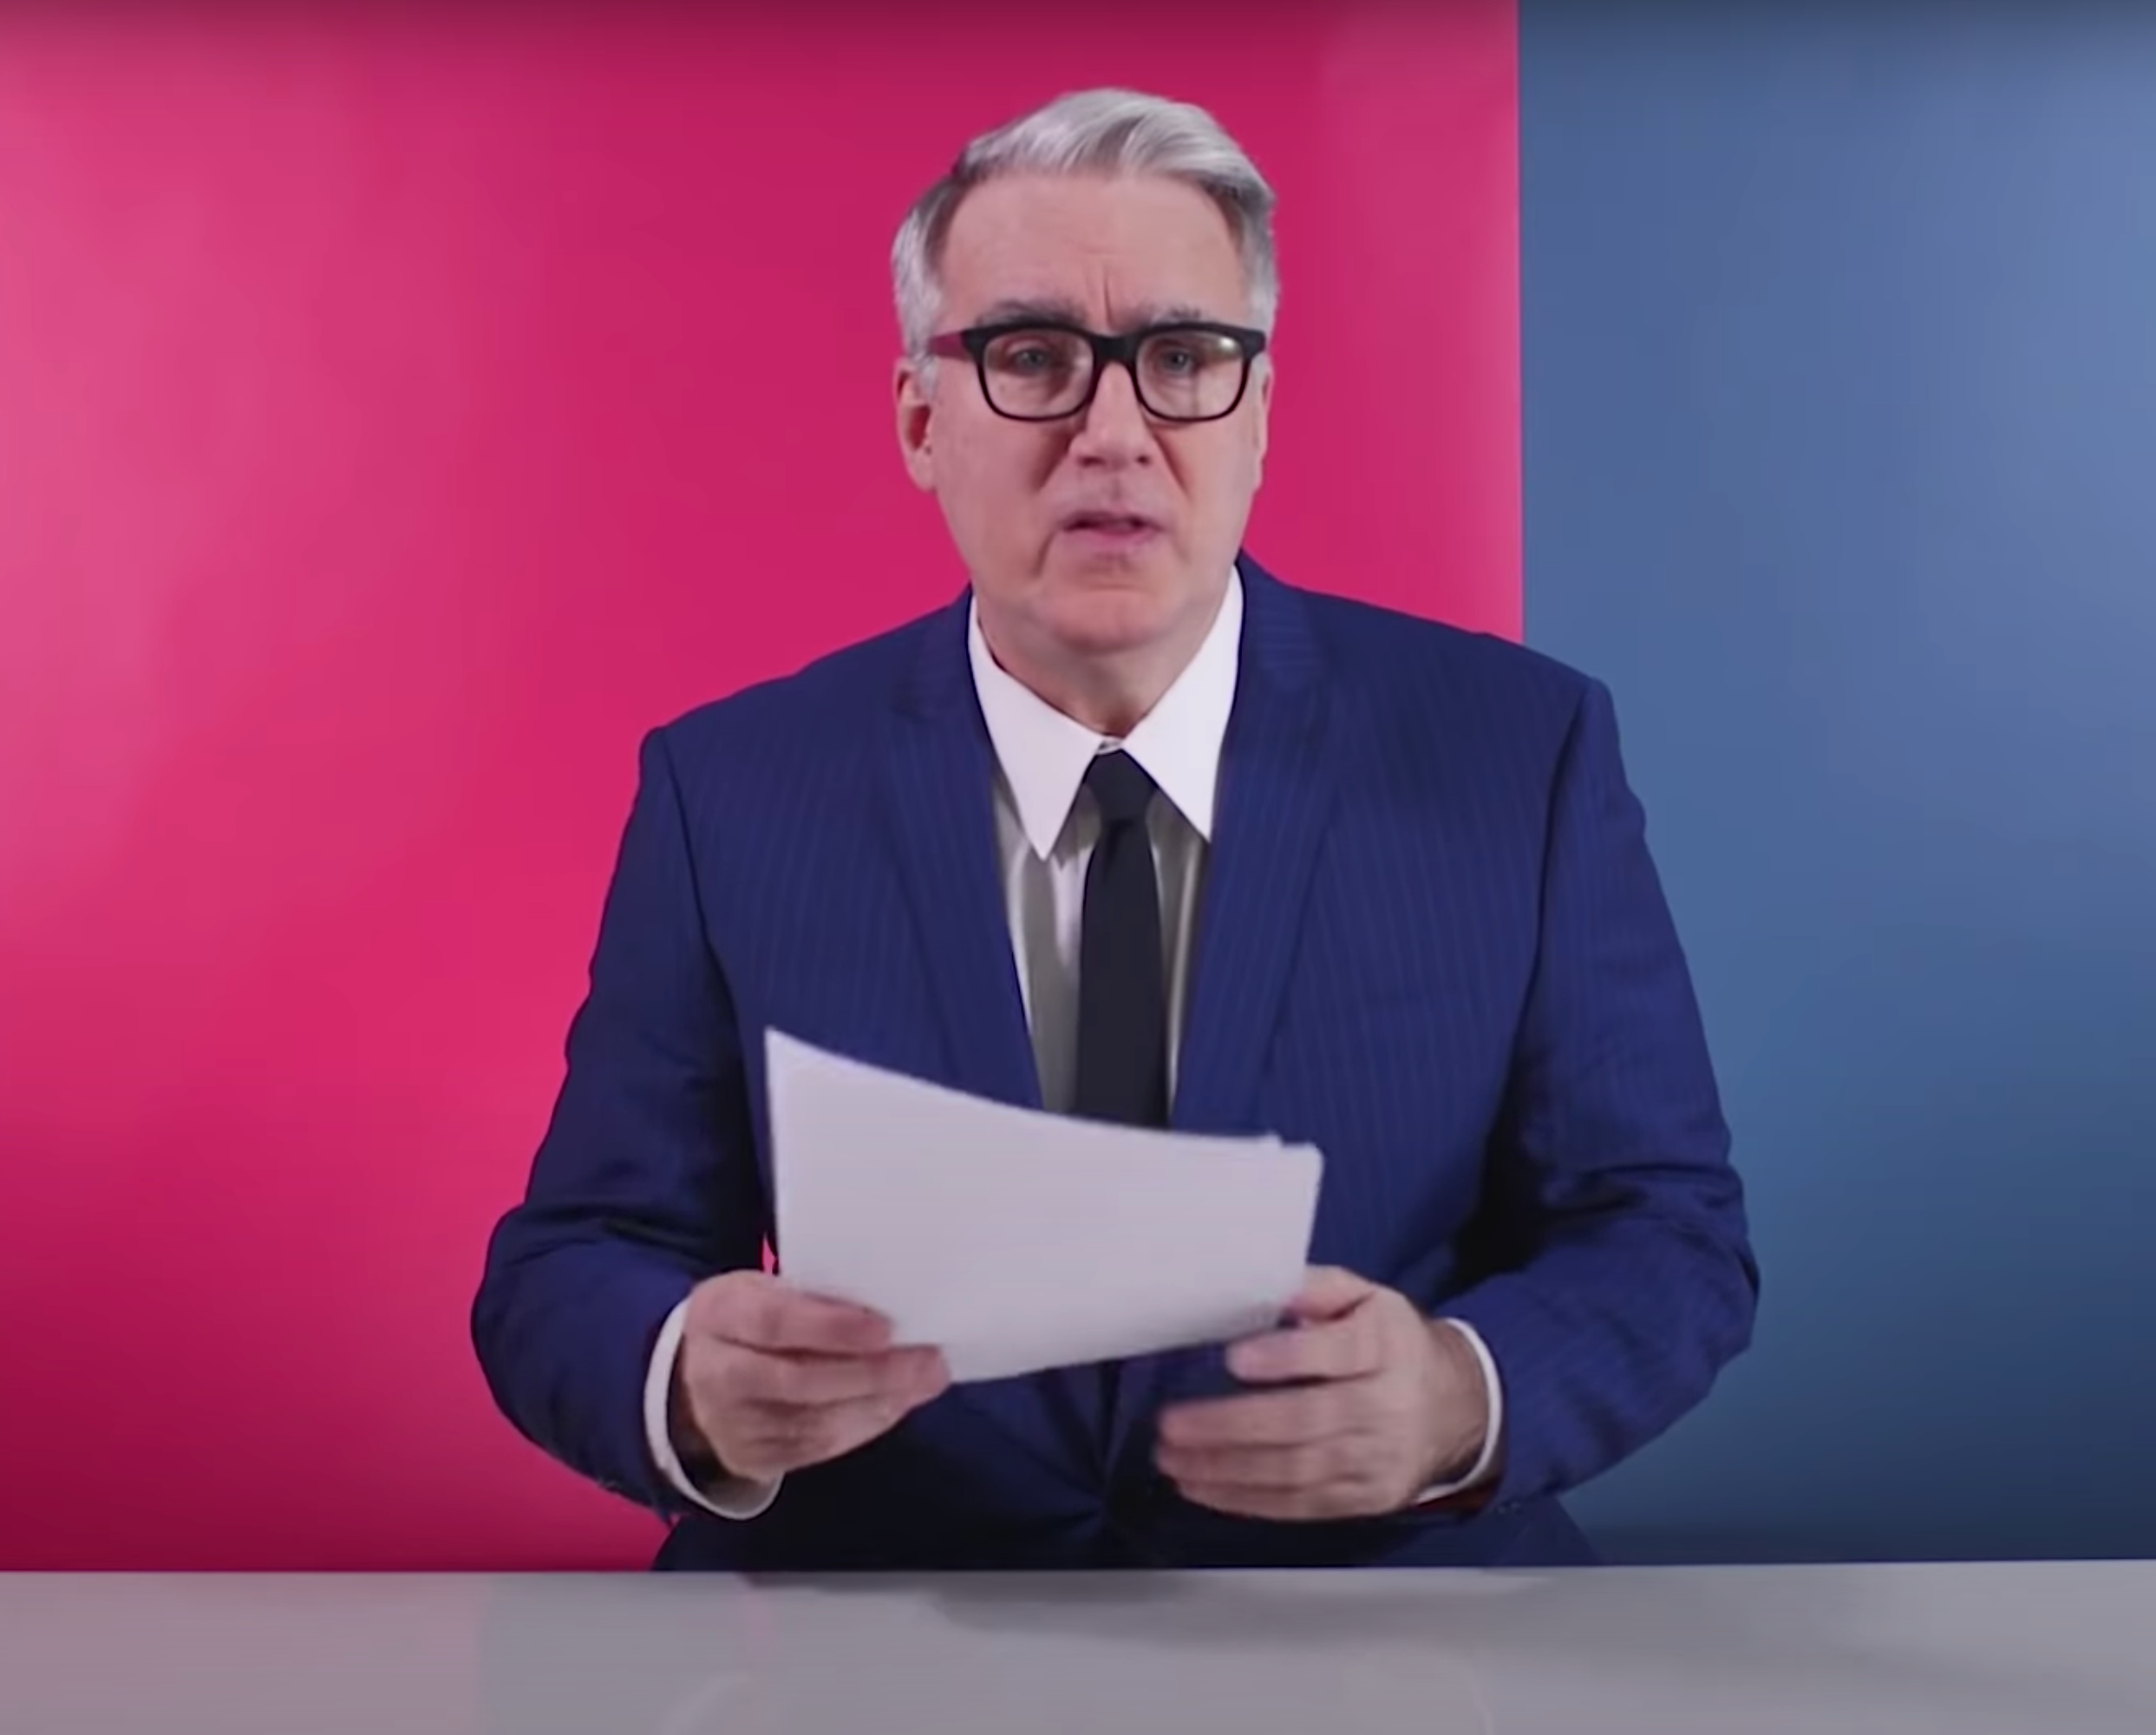 Keith Olbermann implied that the US was “wasting” COVID-19 vaccines on Texas.